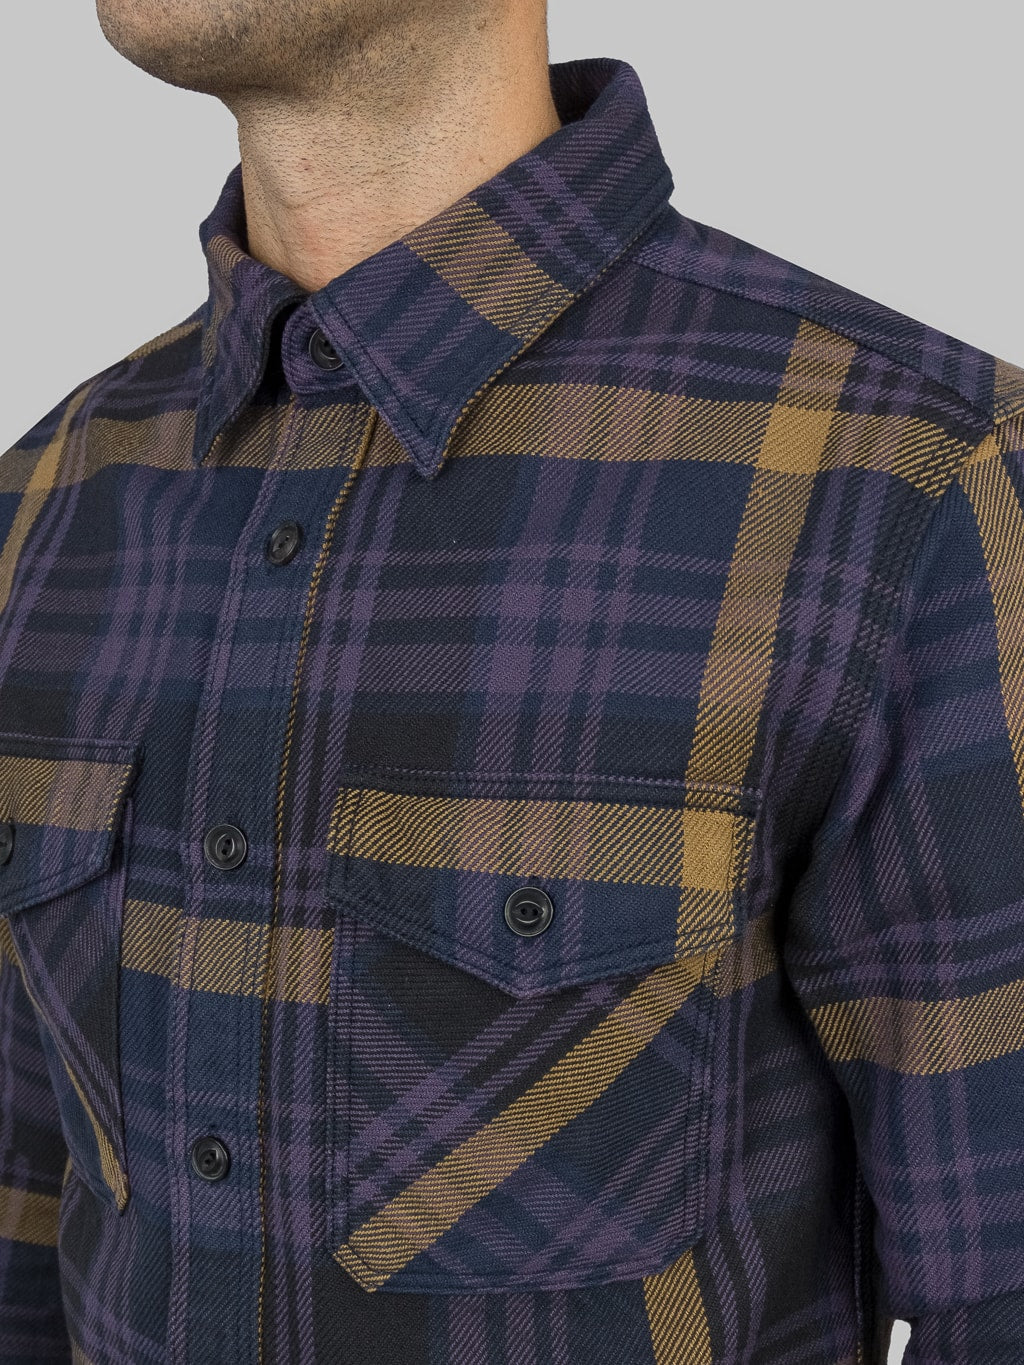 ues extra heavy selvedge flannel shirt navy chest pockets